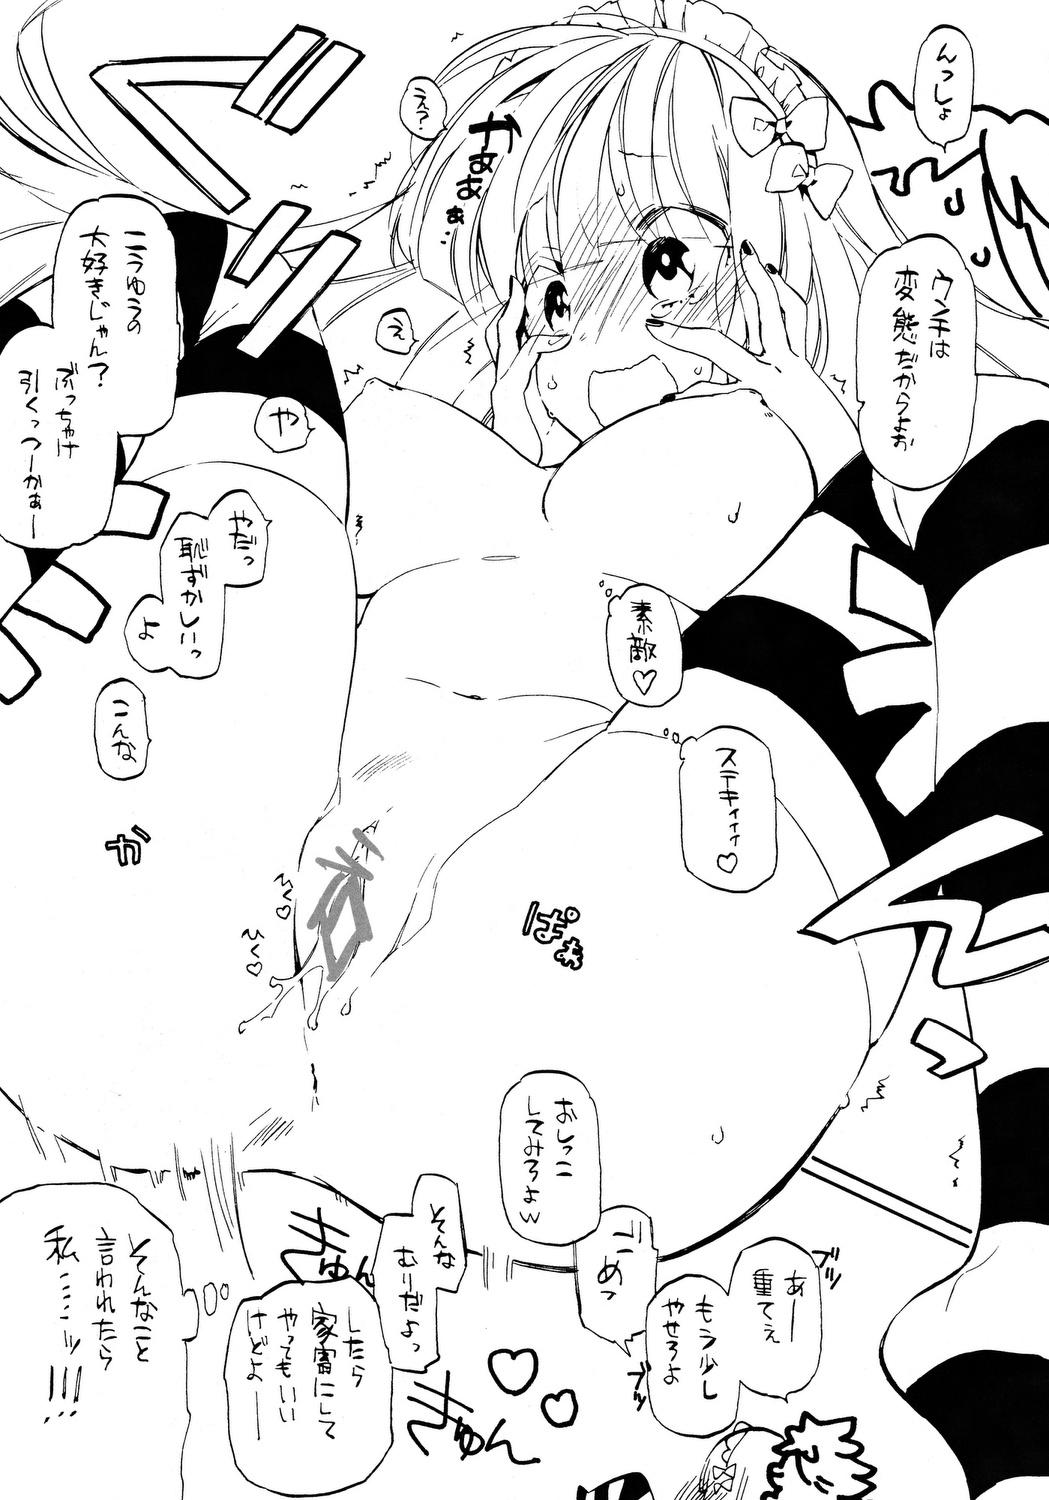 Full Honey Honey - Panty and stocking with garterbelt Emo - Page 11